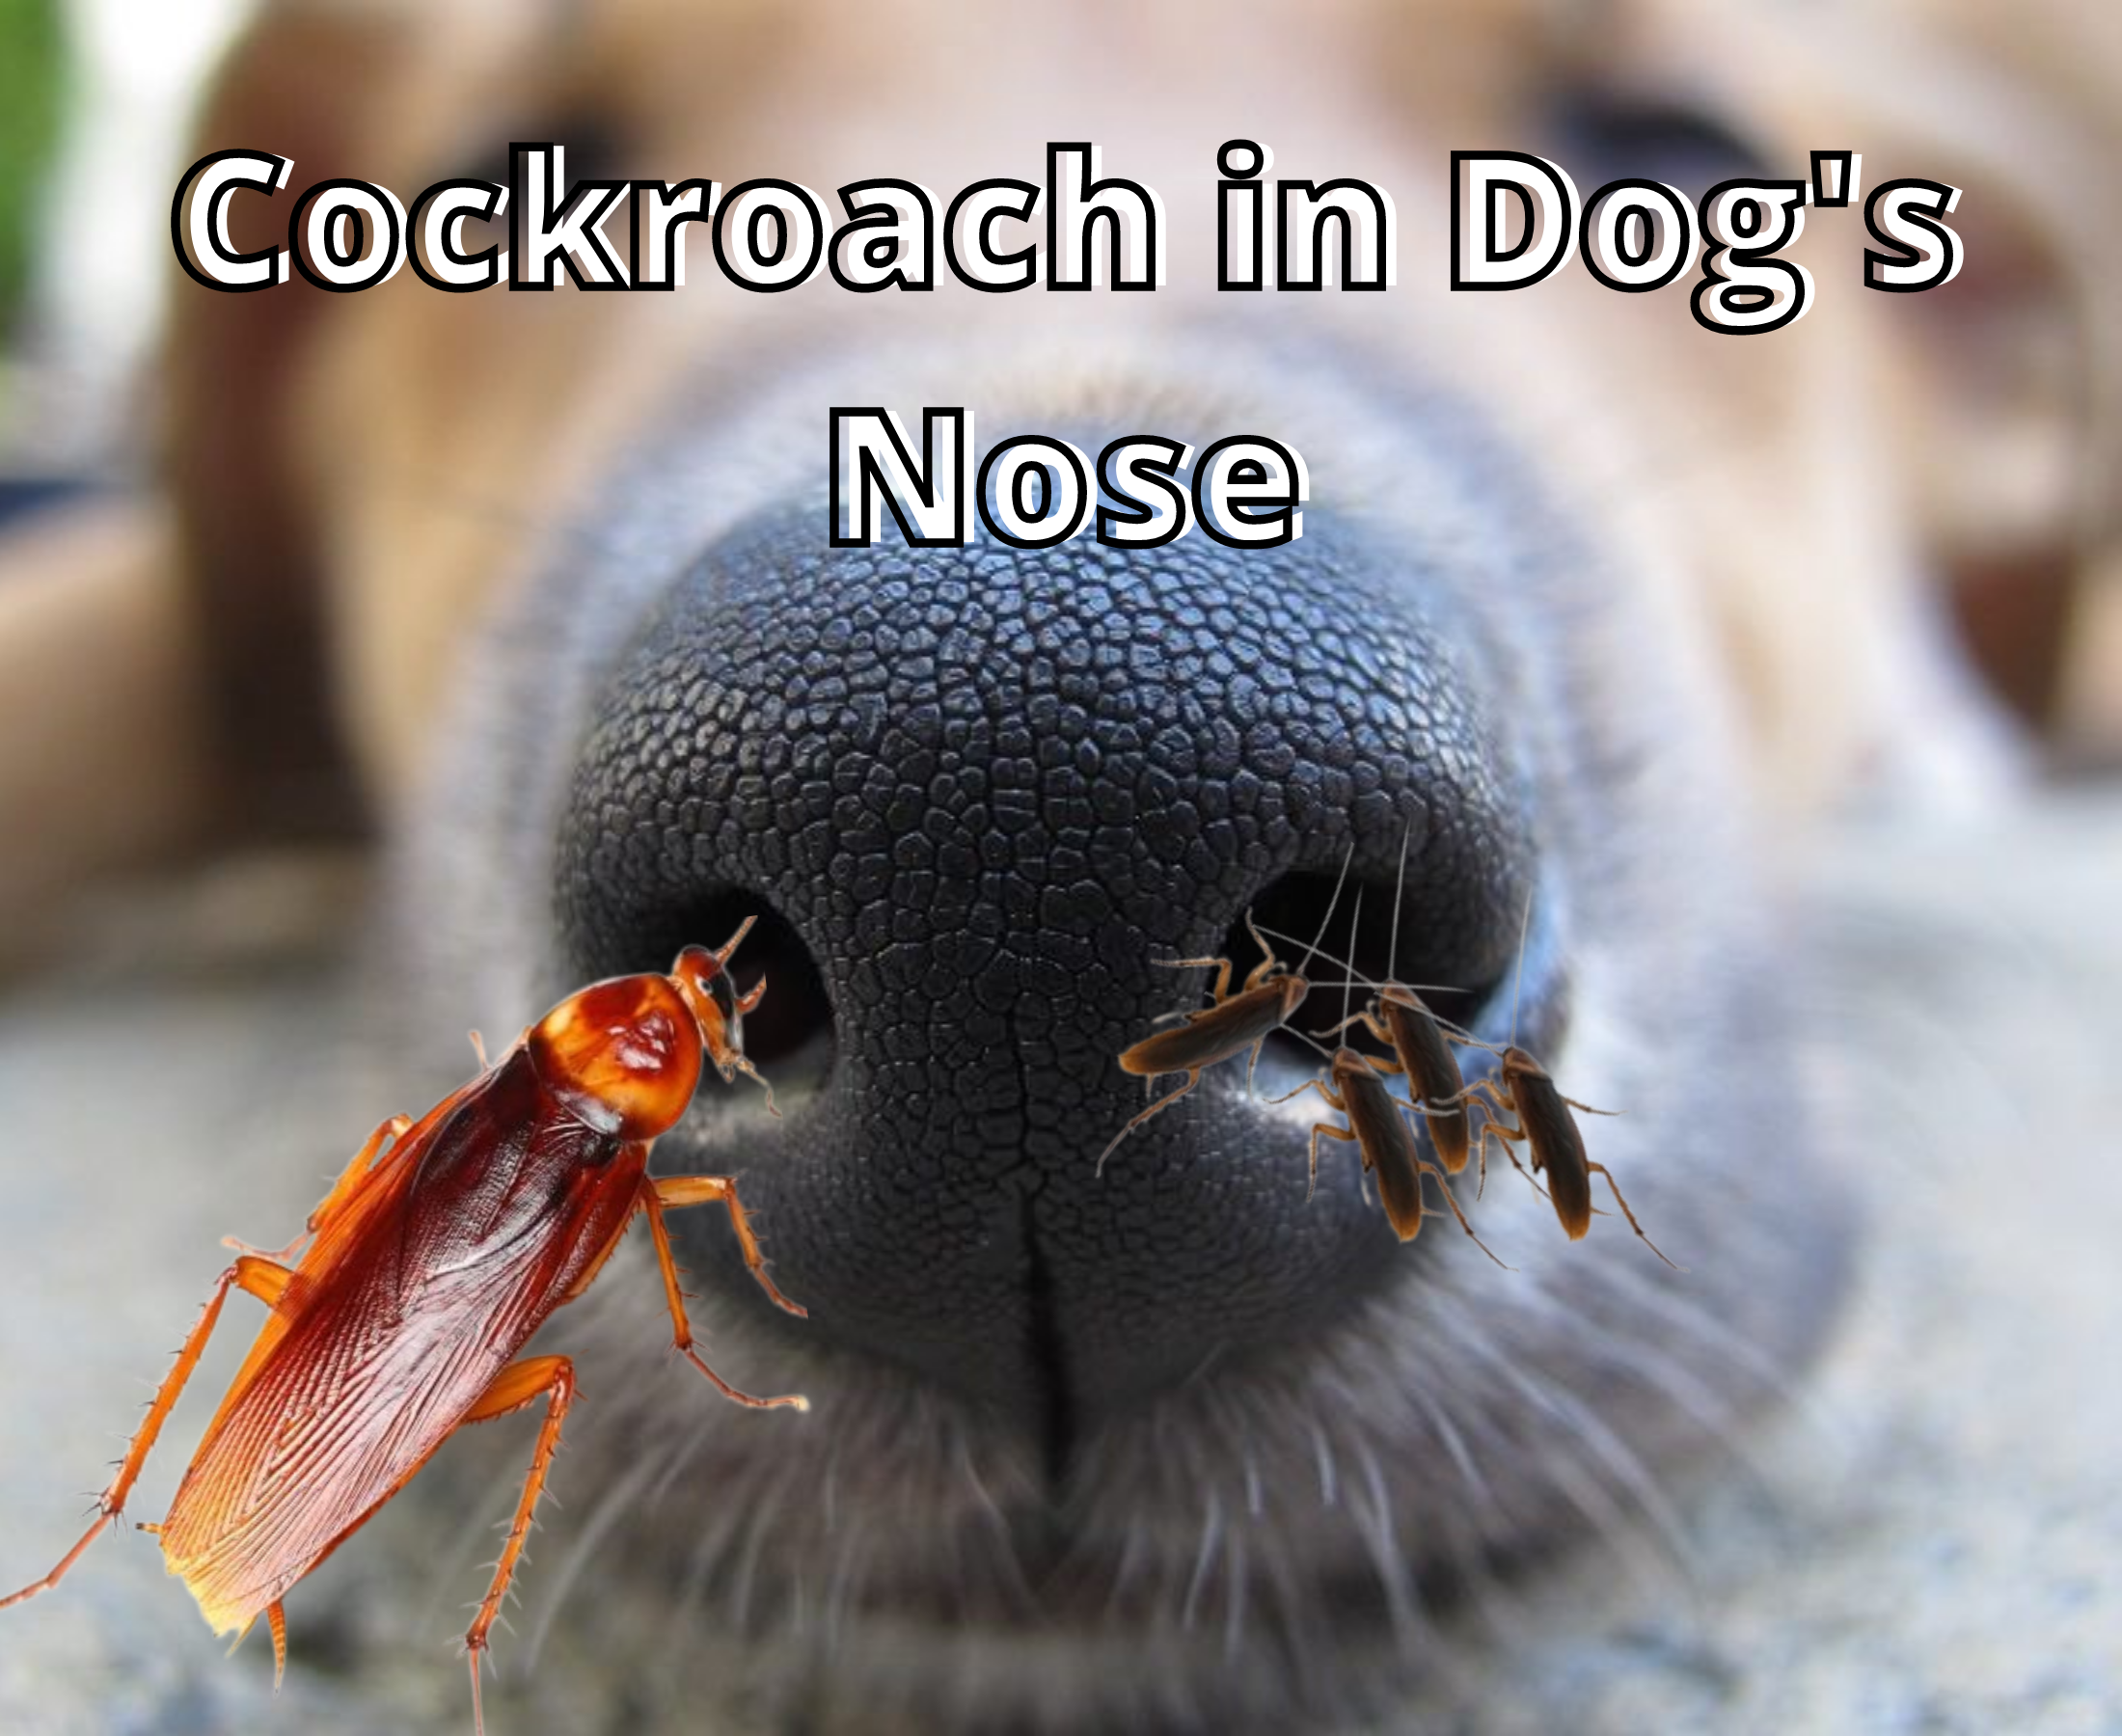 What happens when a little cockroach goes inside a dog's nose?